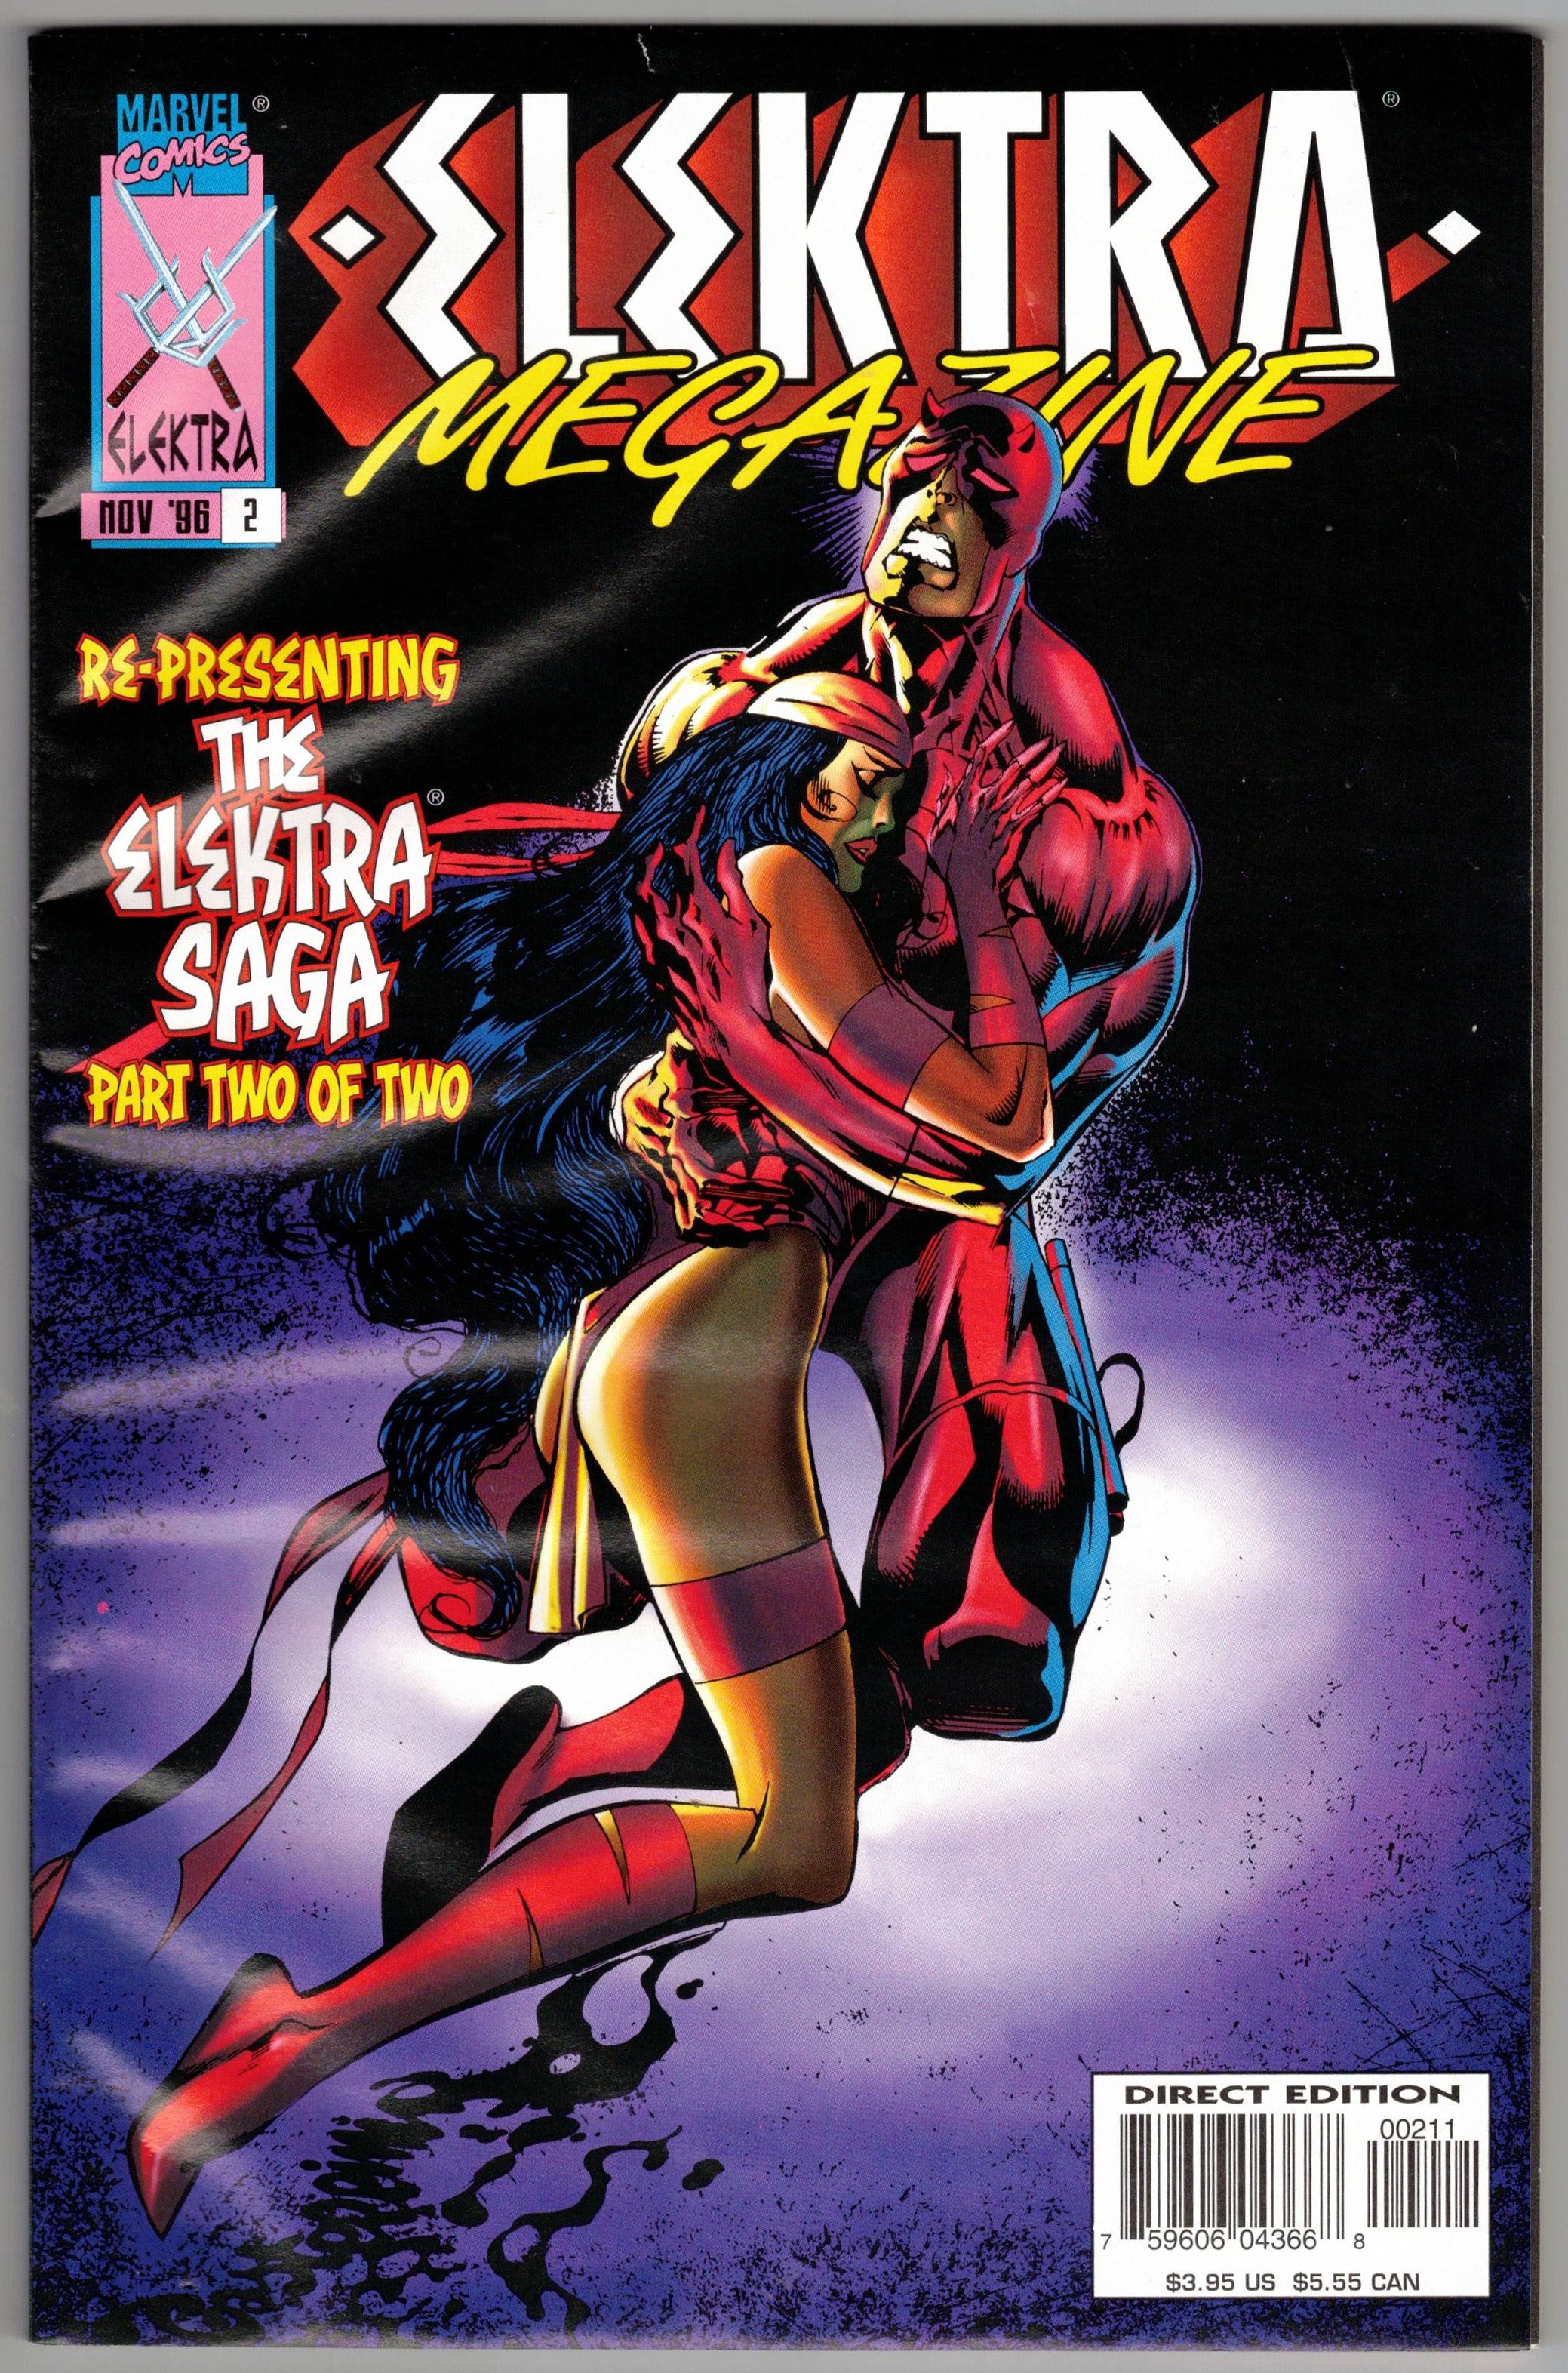 Photo of Elektra Megazine (1996) Issue 2 - Fine Comic sold by Stronghold Collectibles